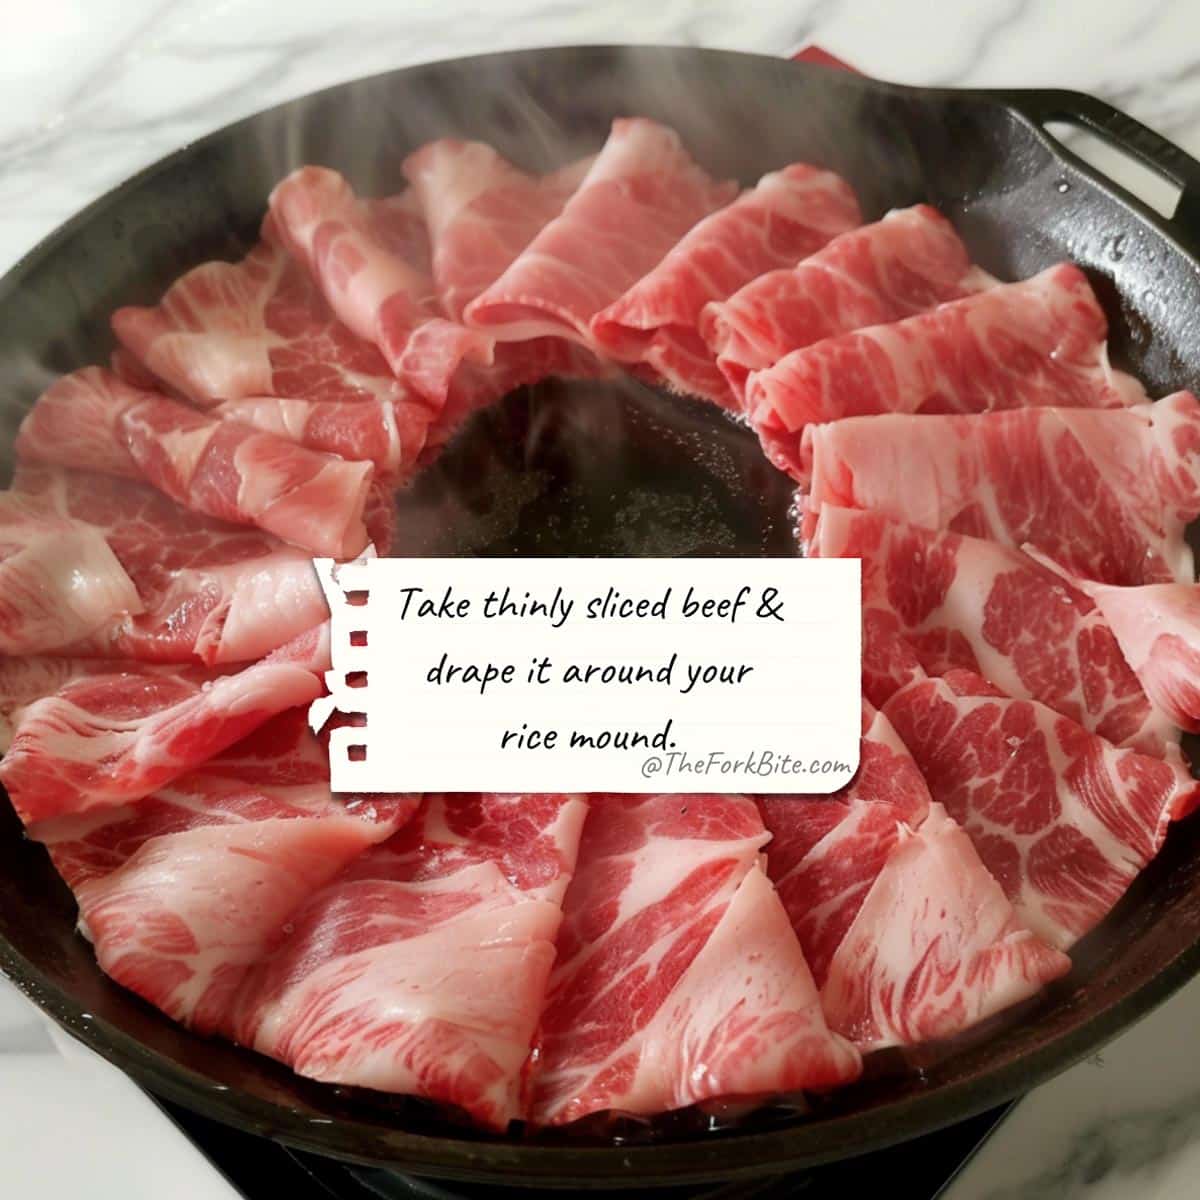 Raw beef sizzling on a hot pan for Pepper Lunch recipe